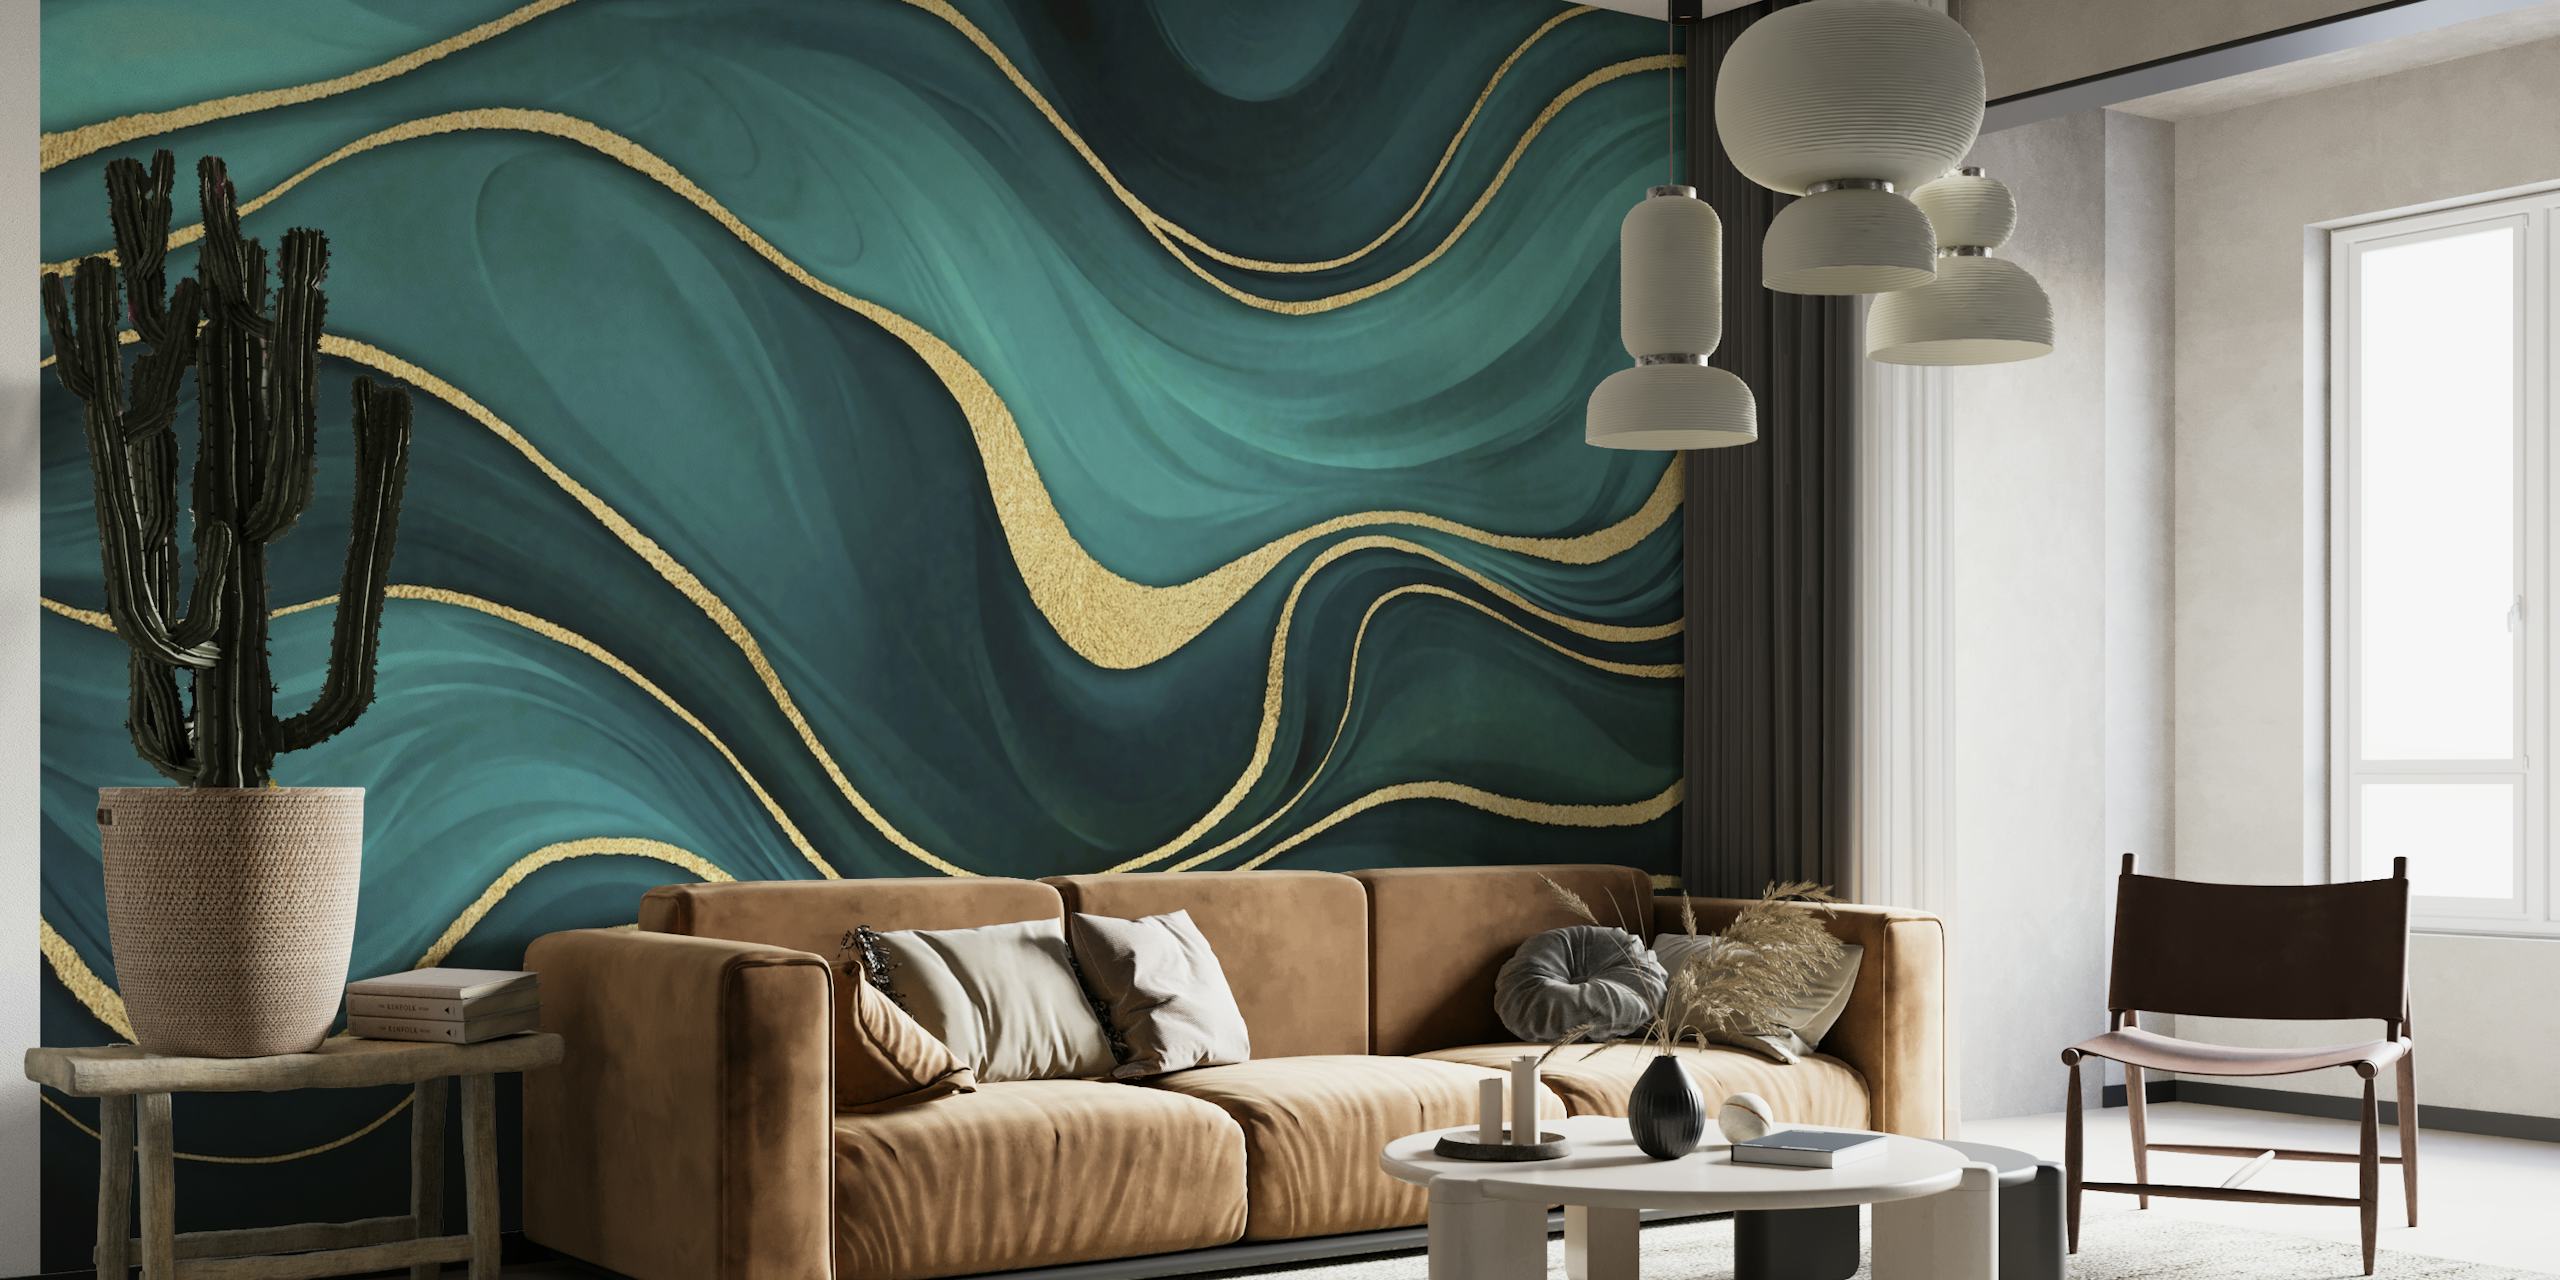 Luxury Marble Teal Turquoise With Gold papel pintado